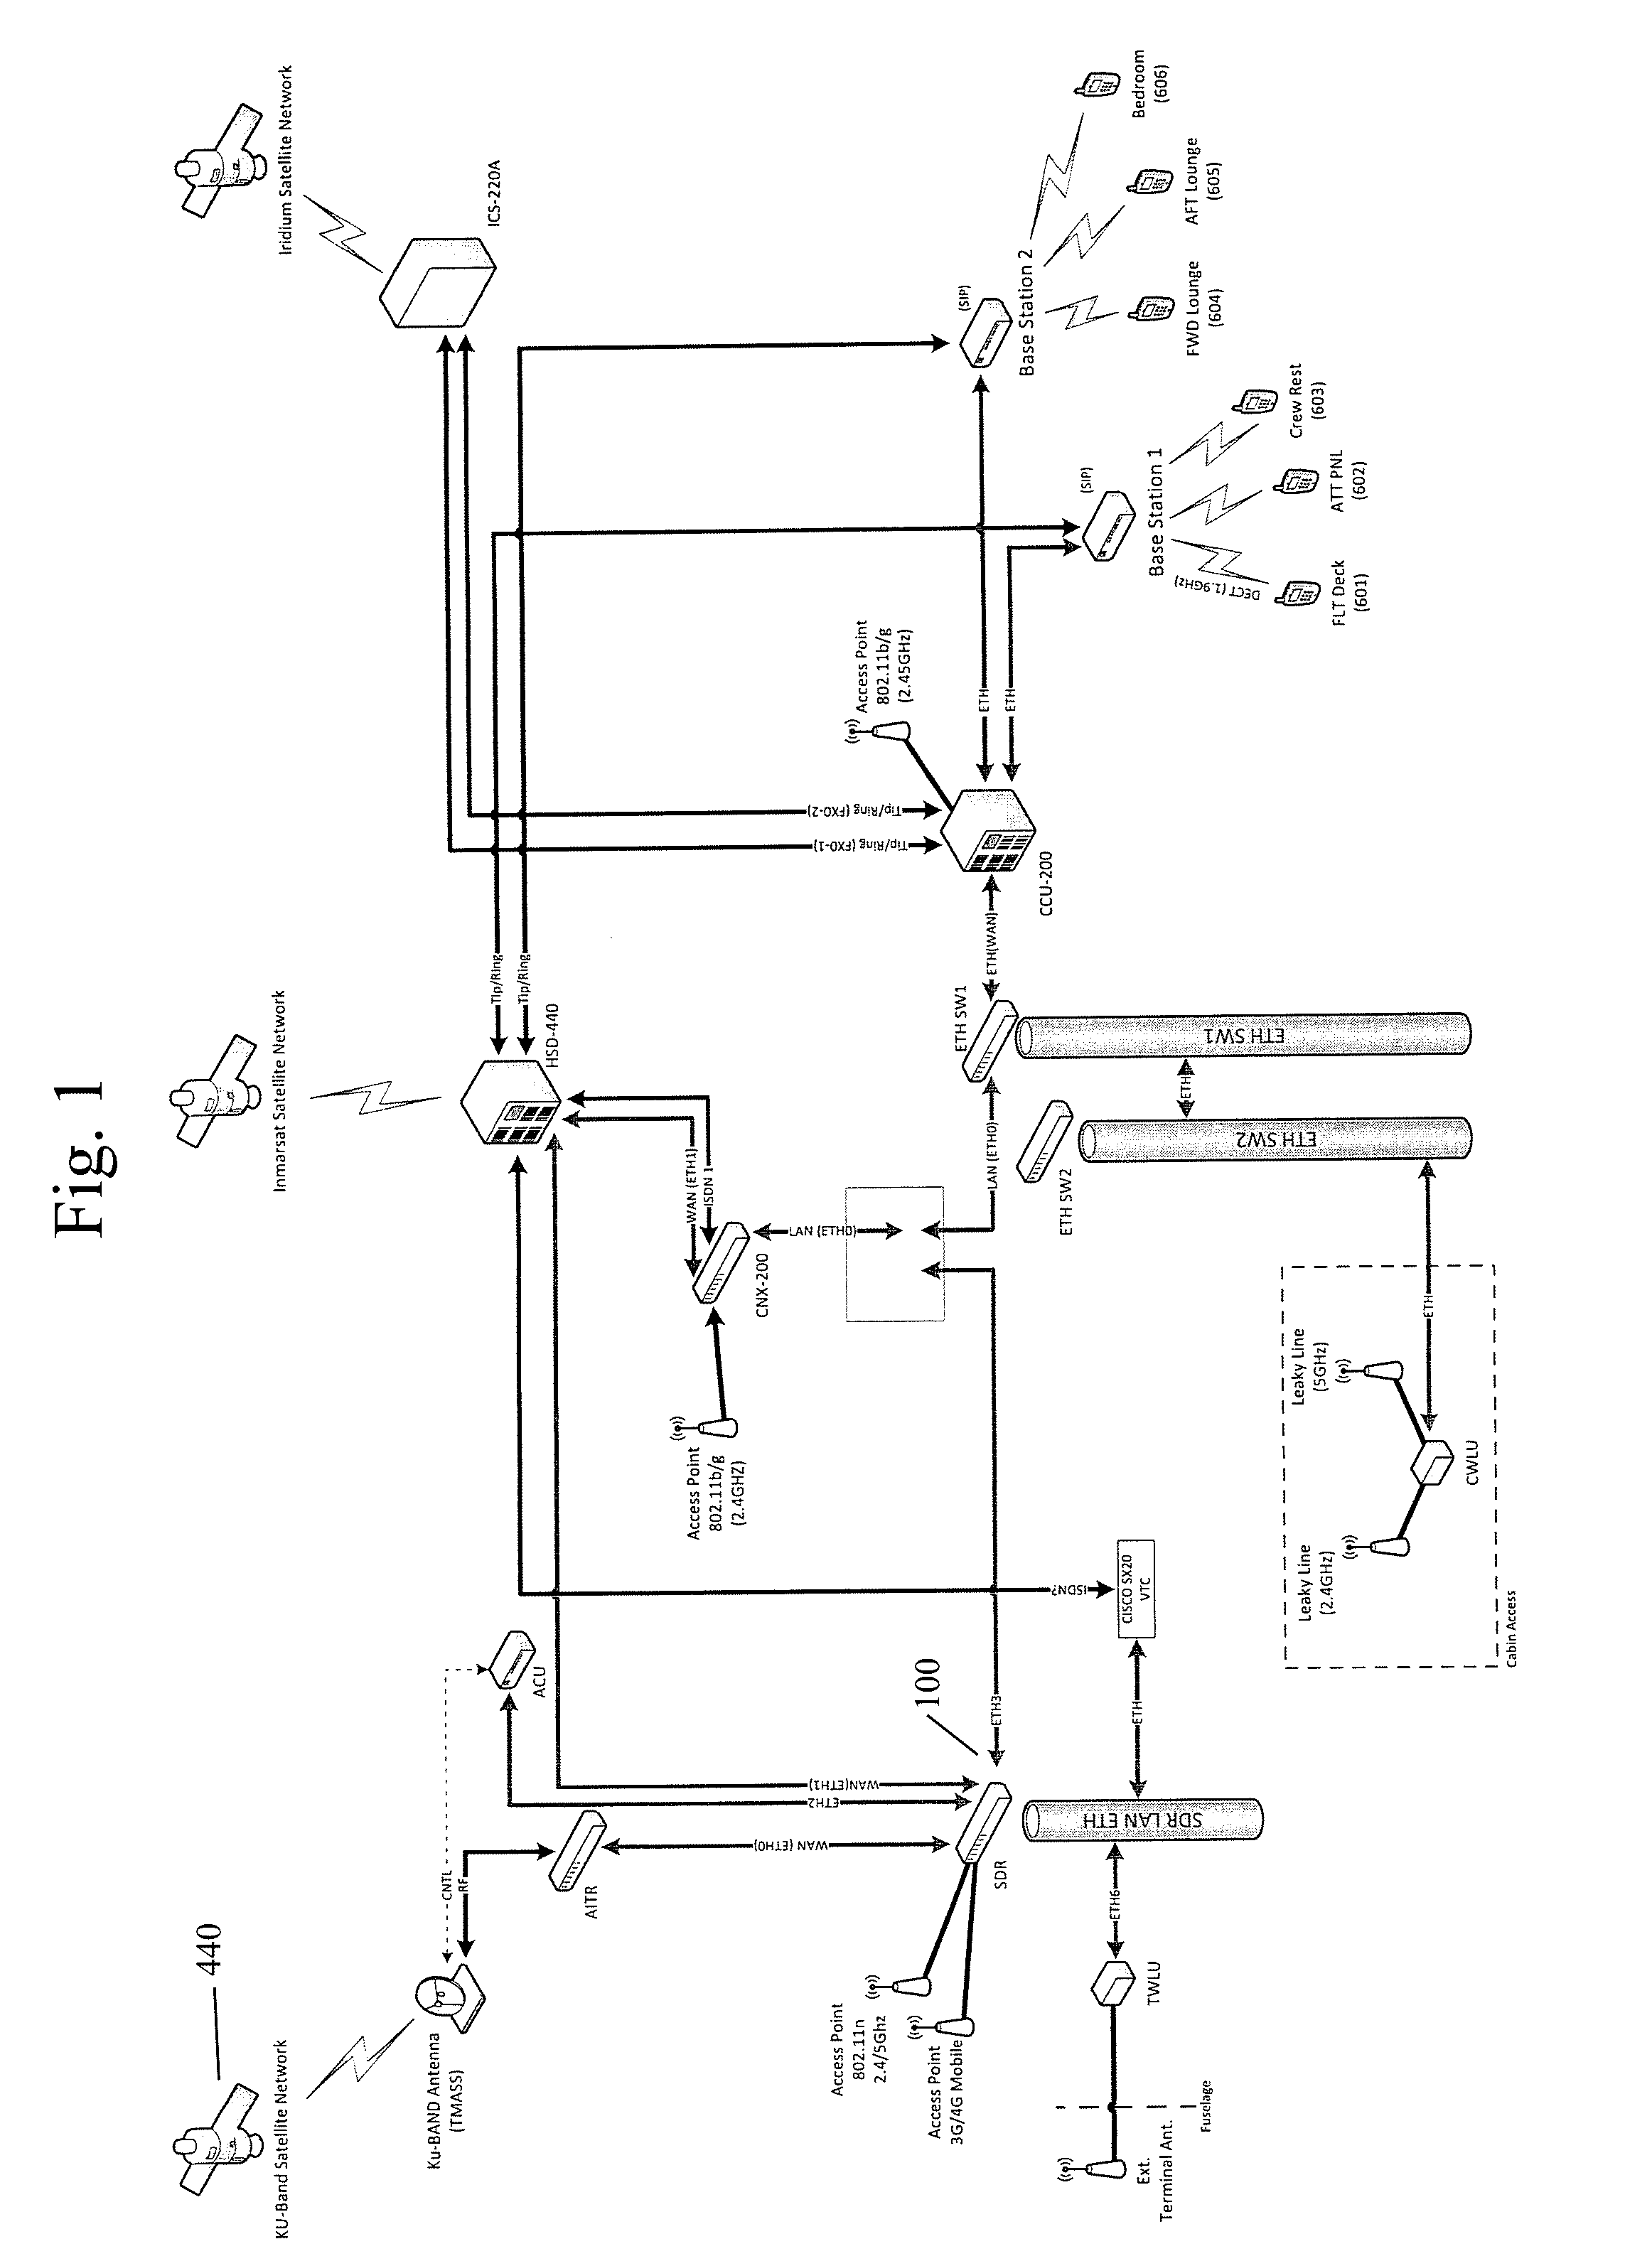 Router for aircraft communications with simultaneous satellite connections